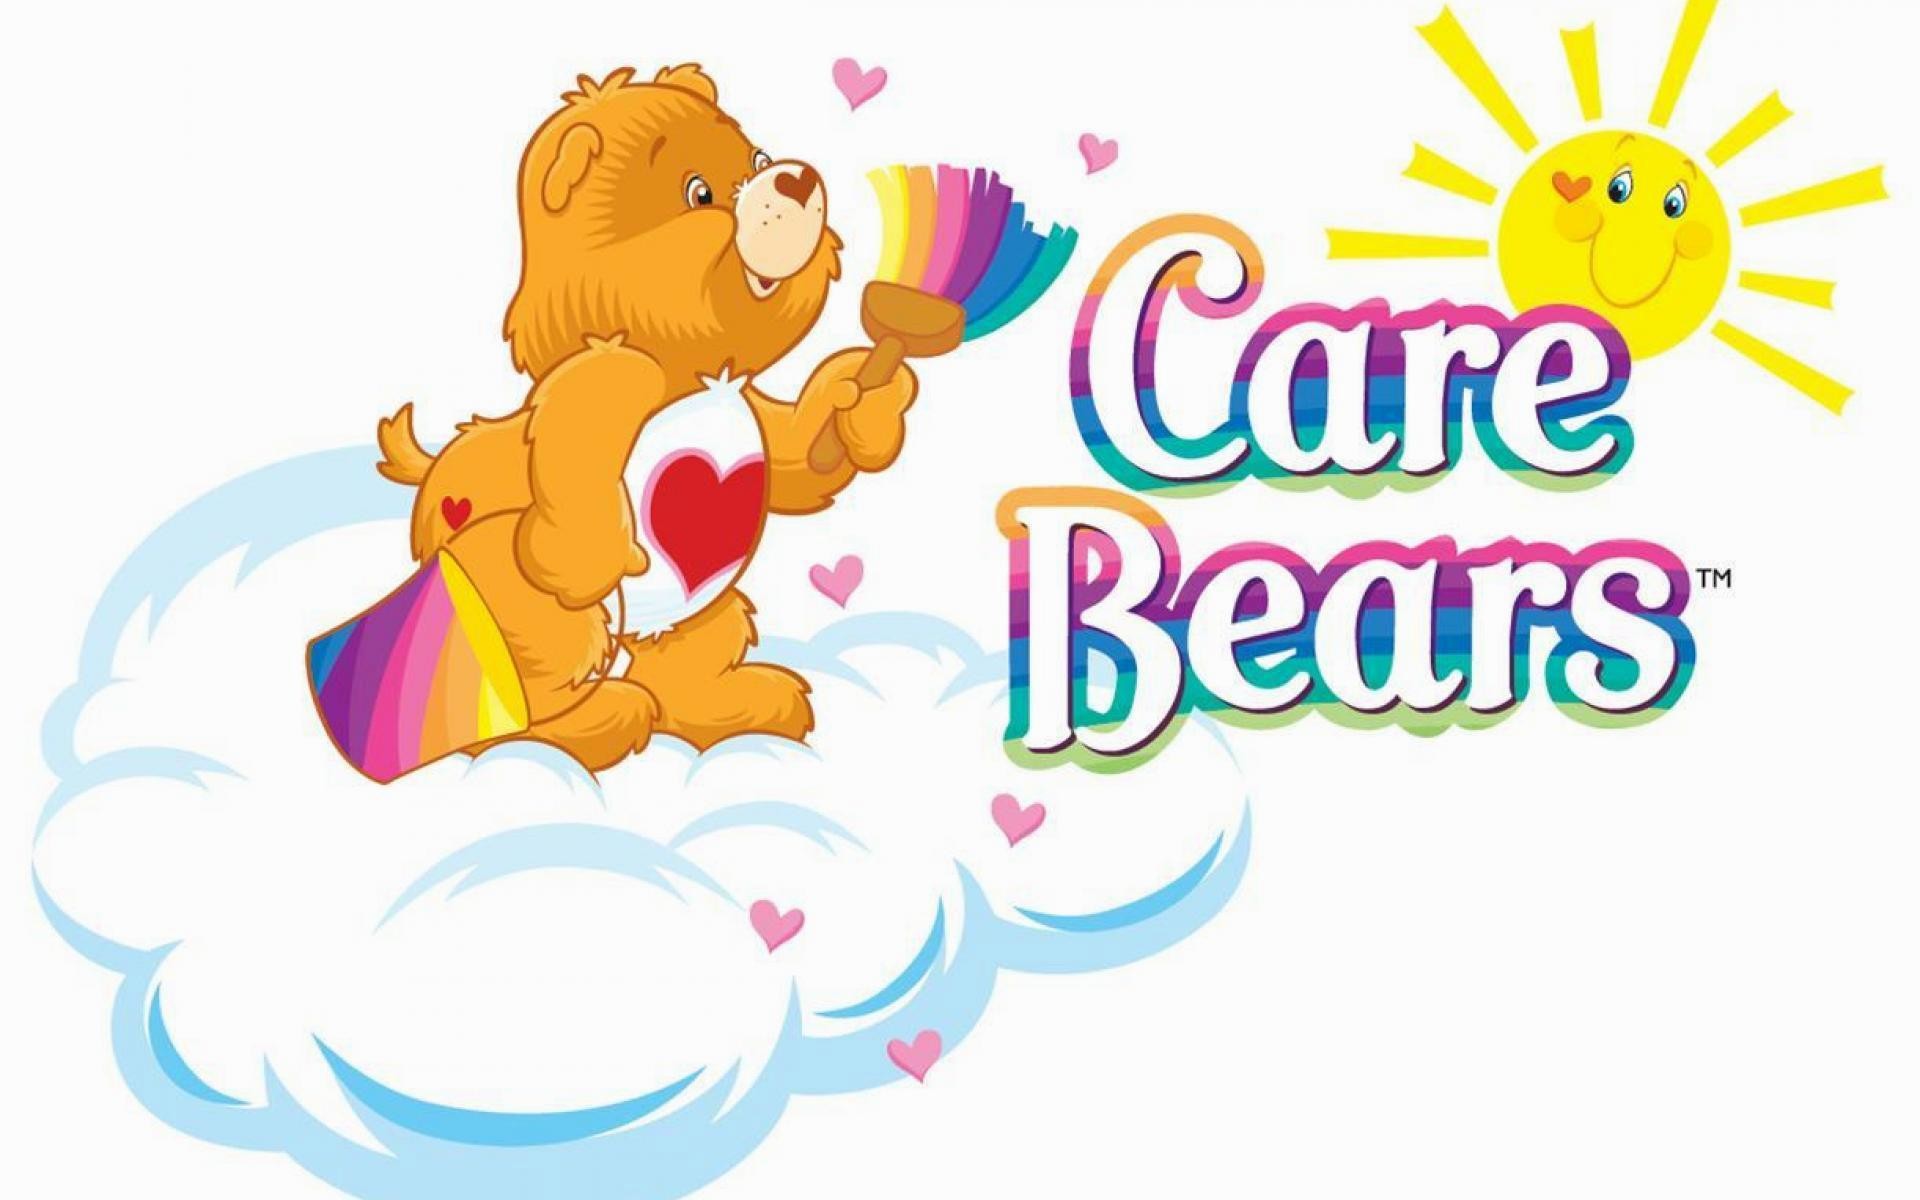 Wallpaper.wiki Image of Care Bear PIC WPC004480